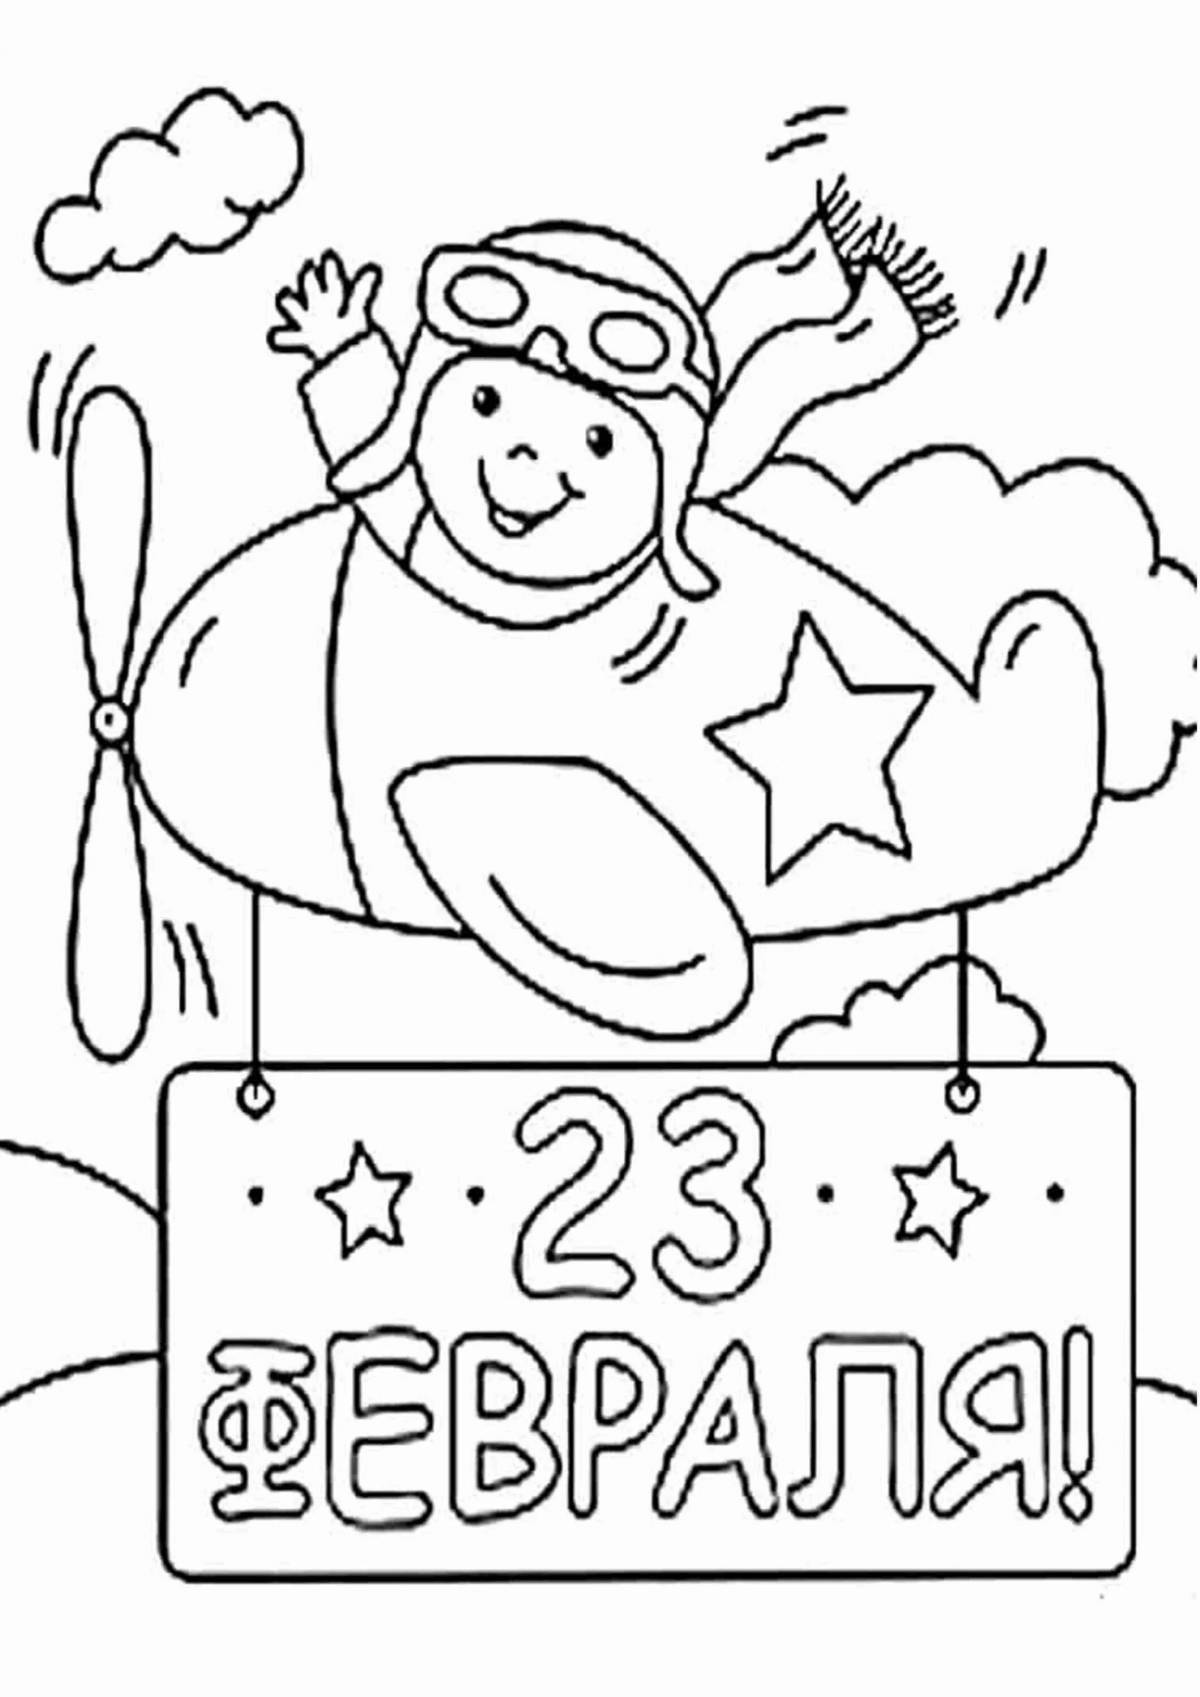 February coloring book for kids